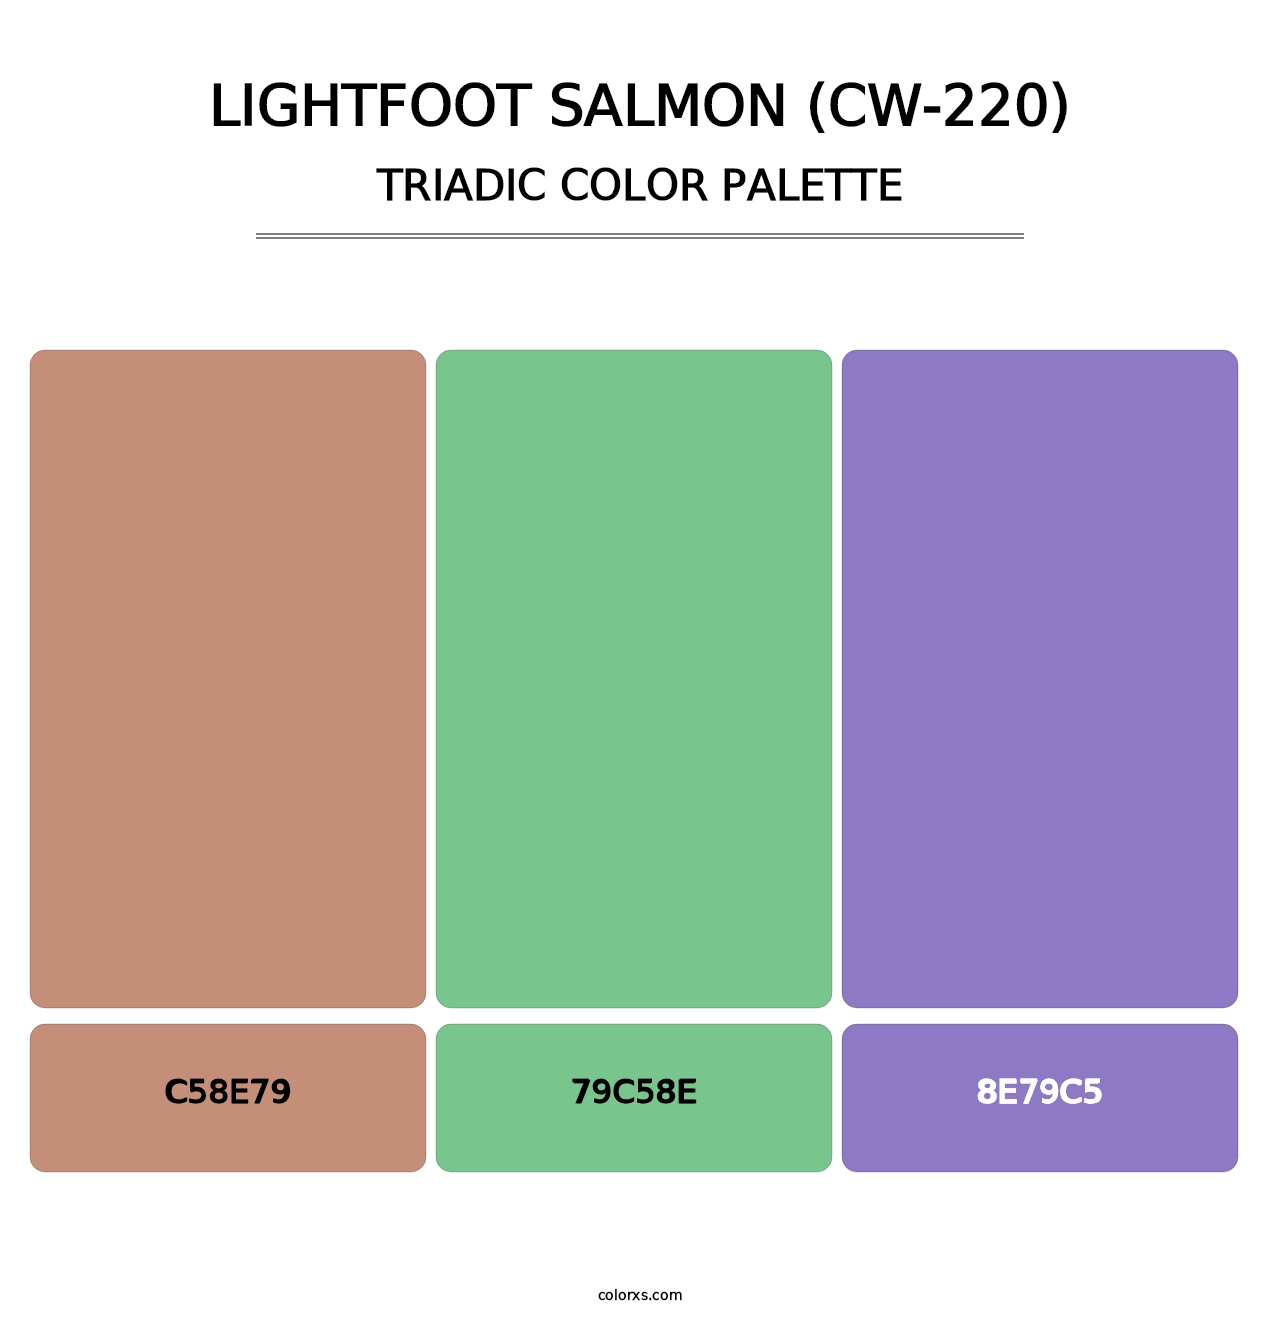 Lightfoot Salmon (CW-220) - Triadic Color Palette